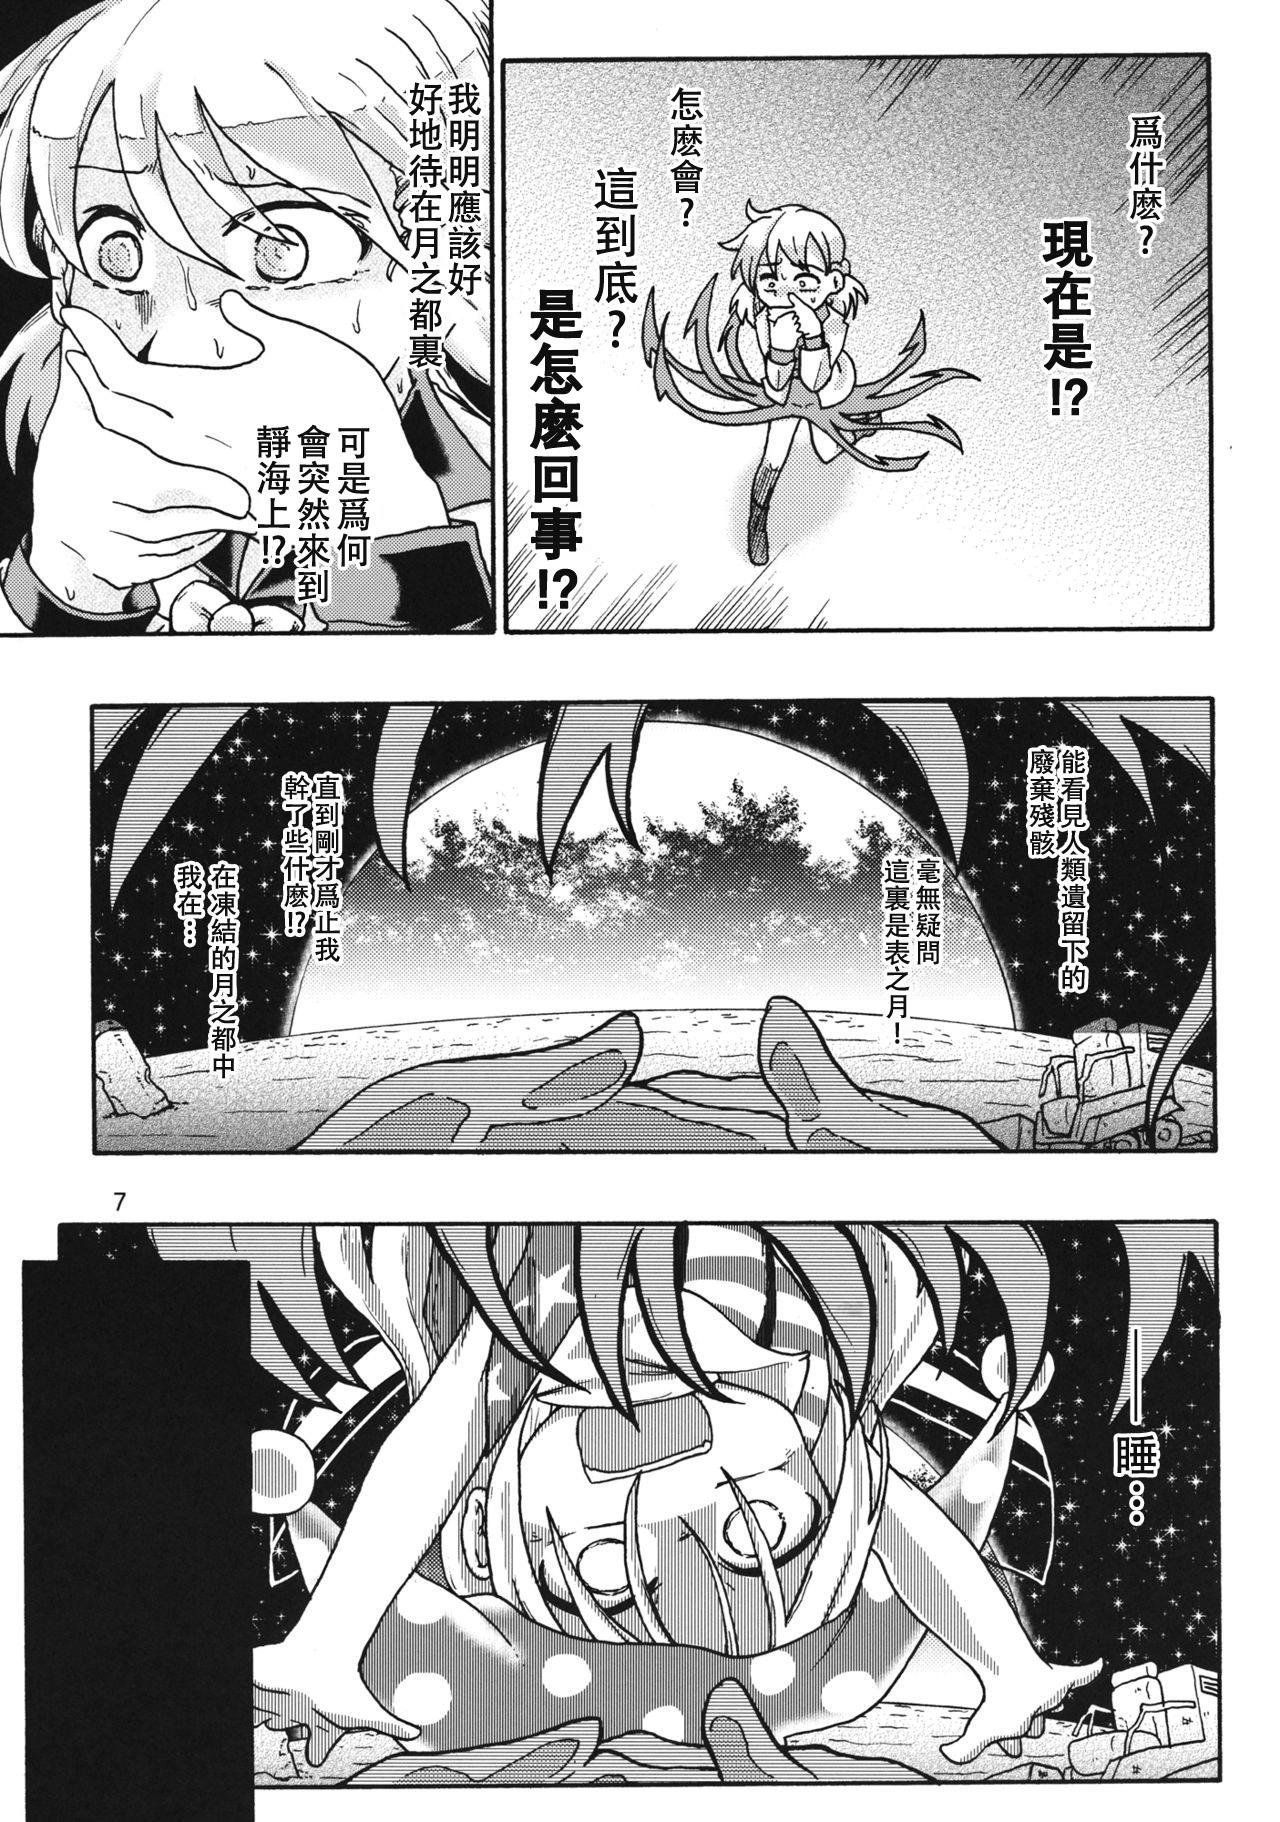 Old Vs Young Creeping! - Touhou project Hoe - Page 6